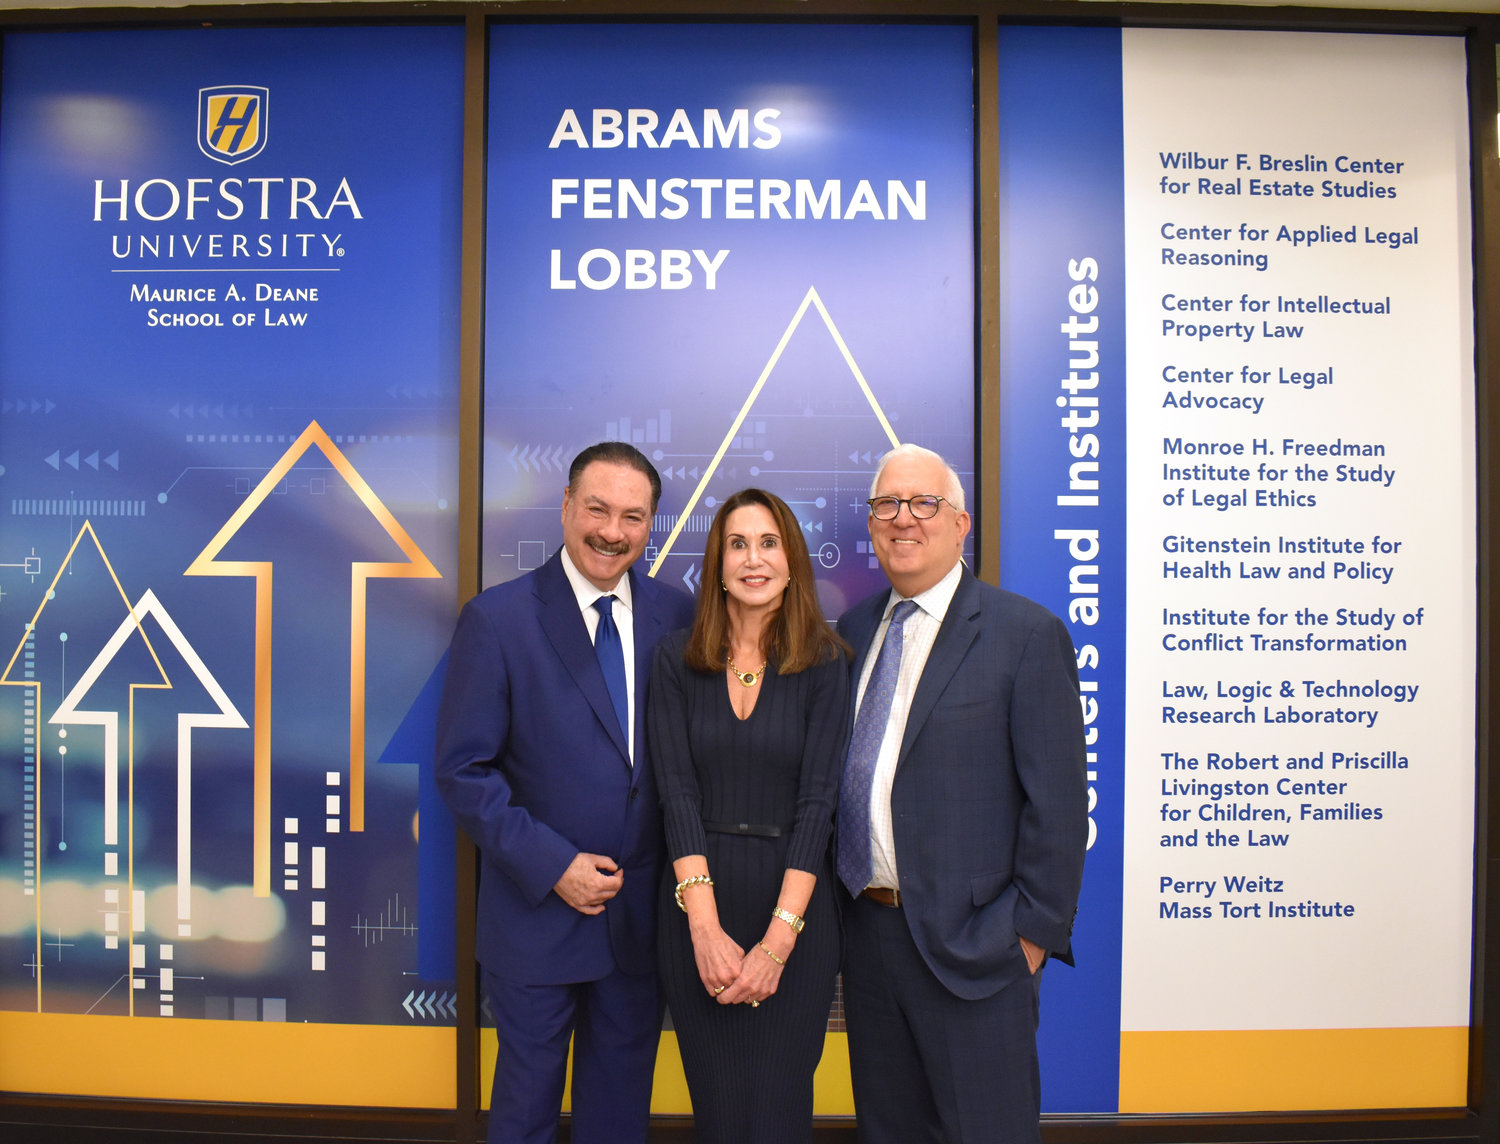 The main entryway into the Maurice A. Deane School of Law at Hofstra University is now known as Abrams Fensterman Lobby after the Lake Success-based firm that has provided money and instruction at the school. Joining in the dedication were, from left, Abrams Fensterman managing partner Howard Fensterman, Hofstra Law dean Gail Prudenti, and Abrams Fensterman executive partner Robert Abrams.